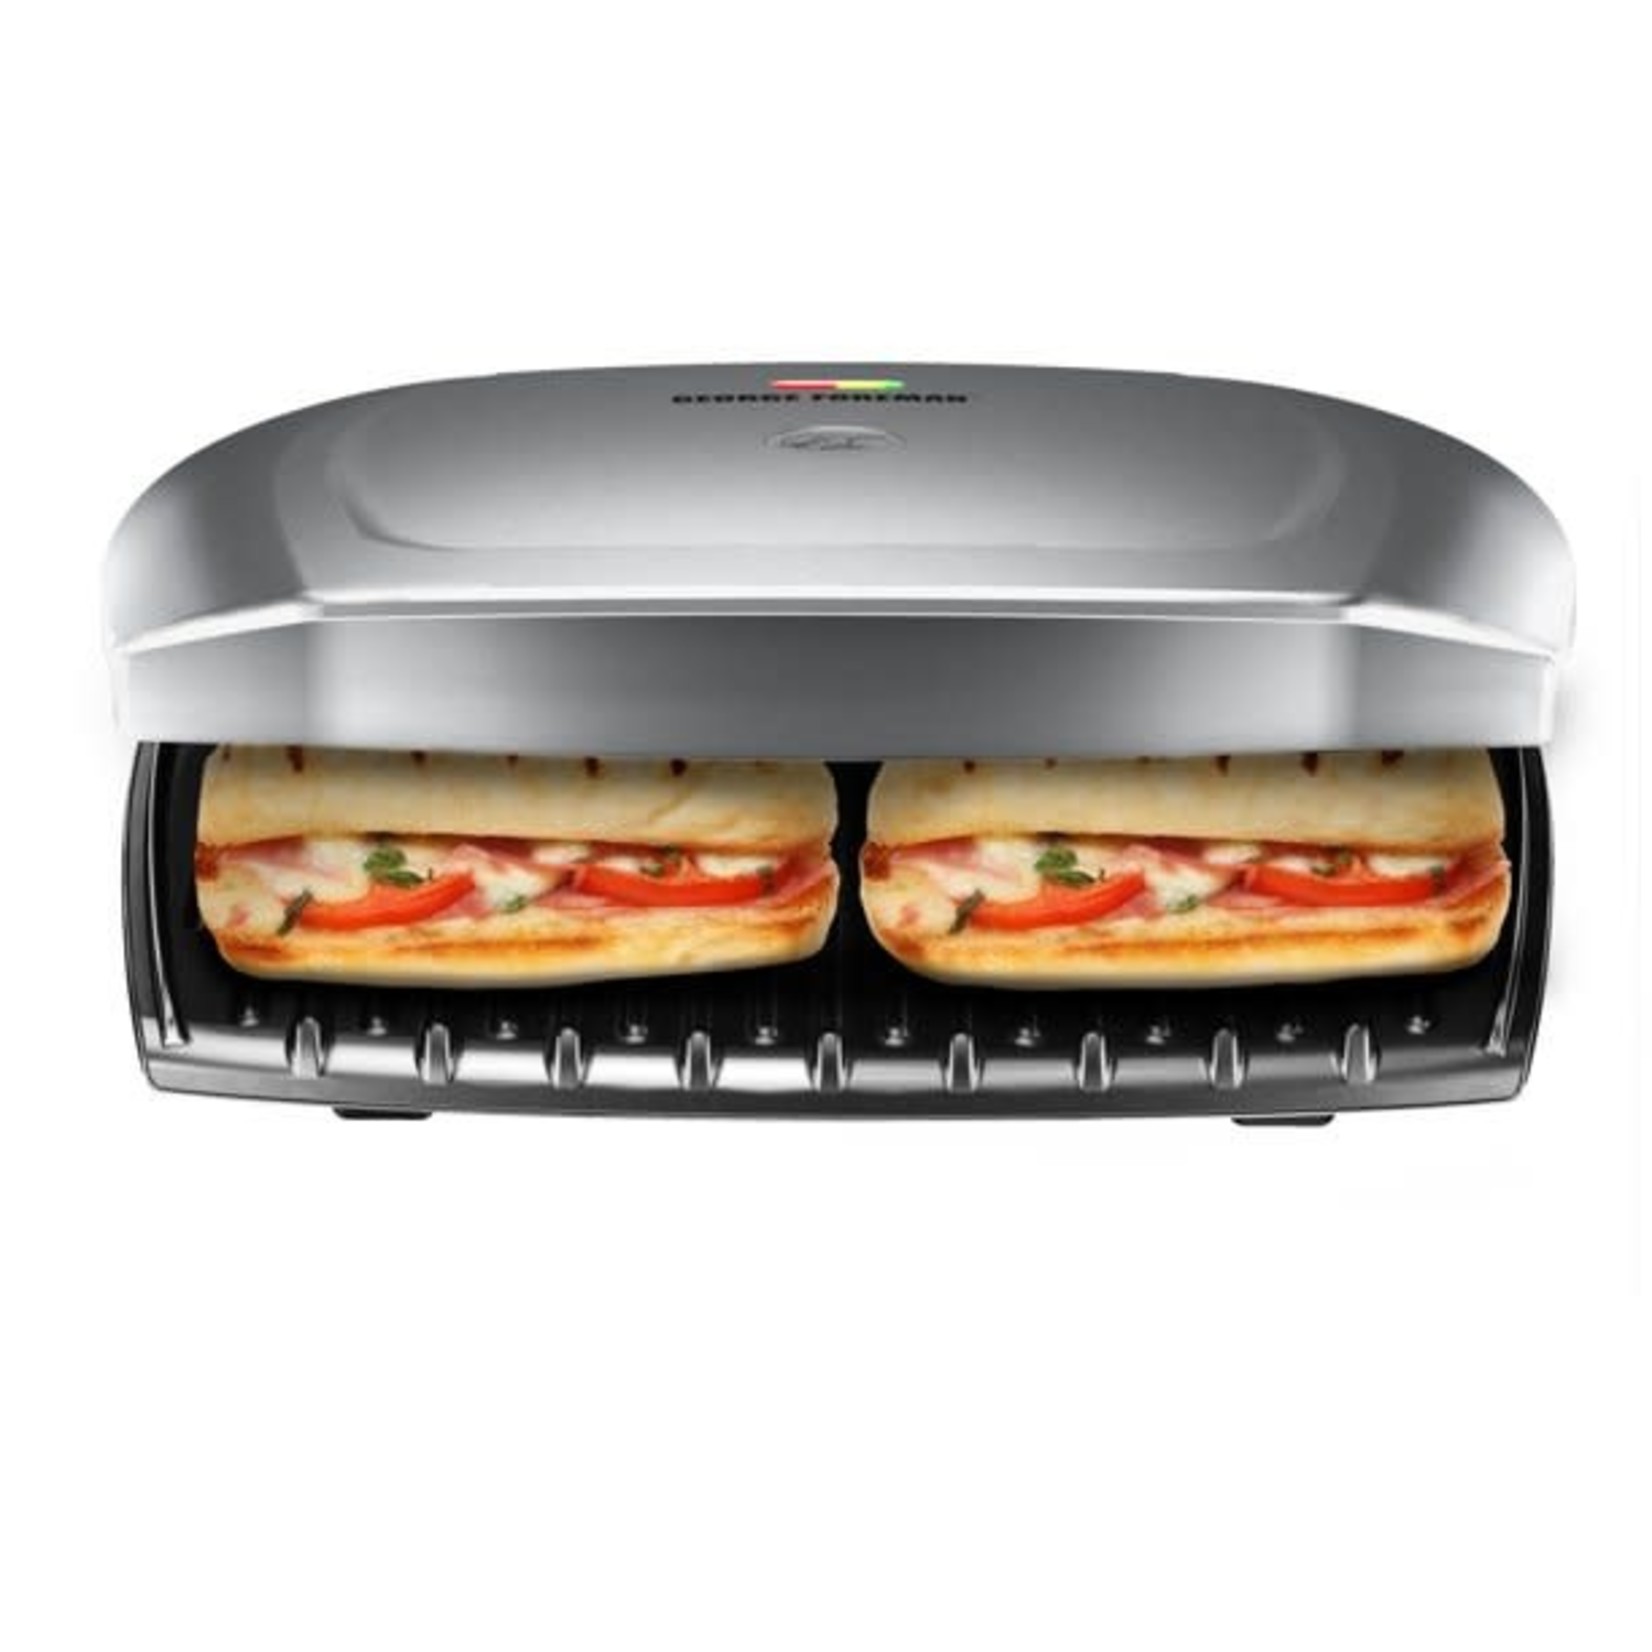 GR2144P George Foreman 9-Serving Grill